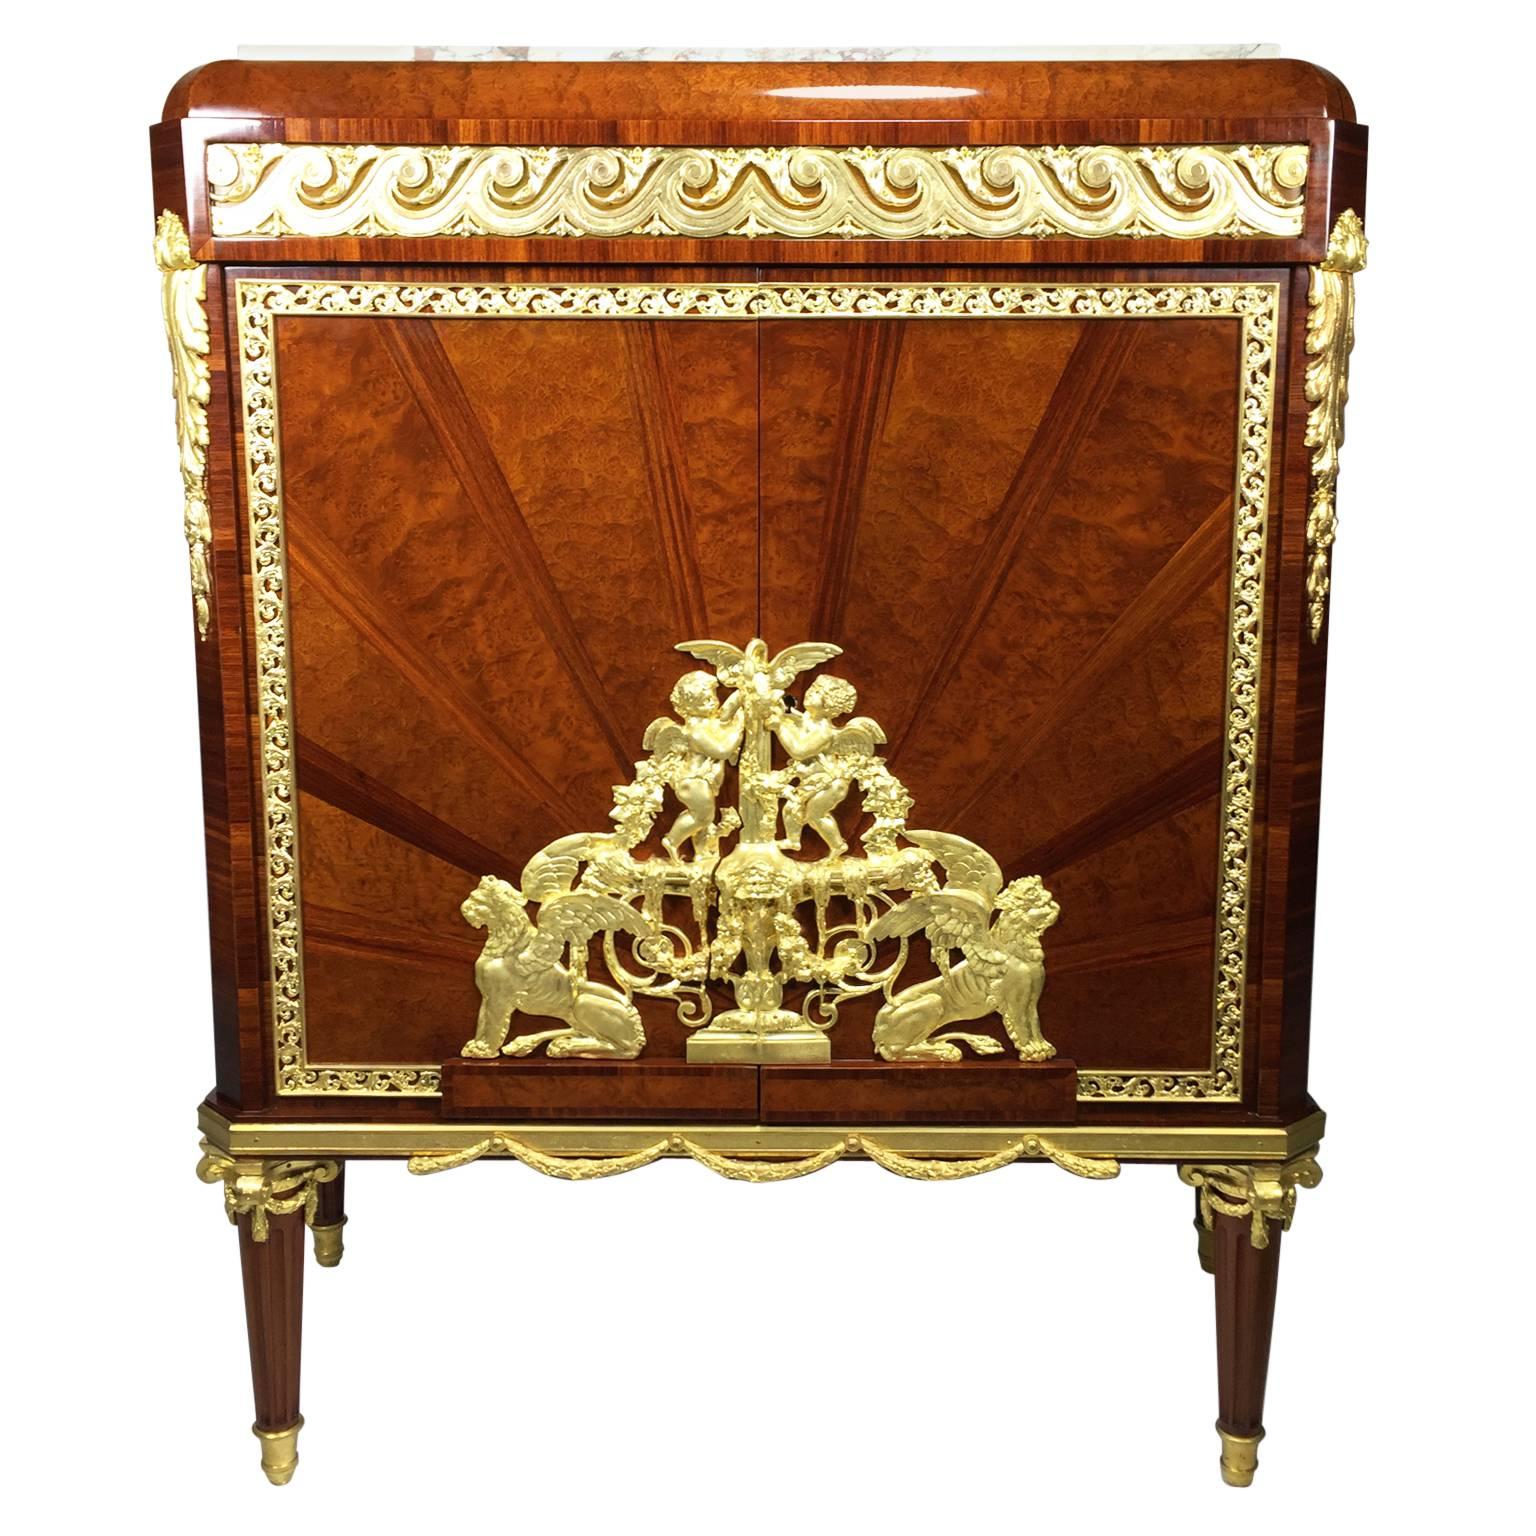 French 19th-20th Century Louis XVI Style Belle Époque Ormolu-Mounted Cabinet For Sale